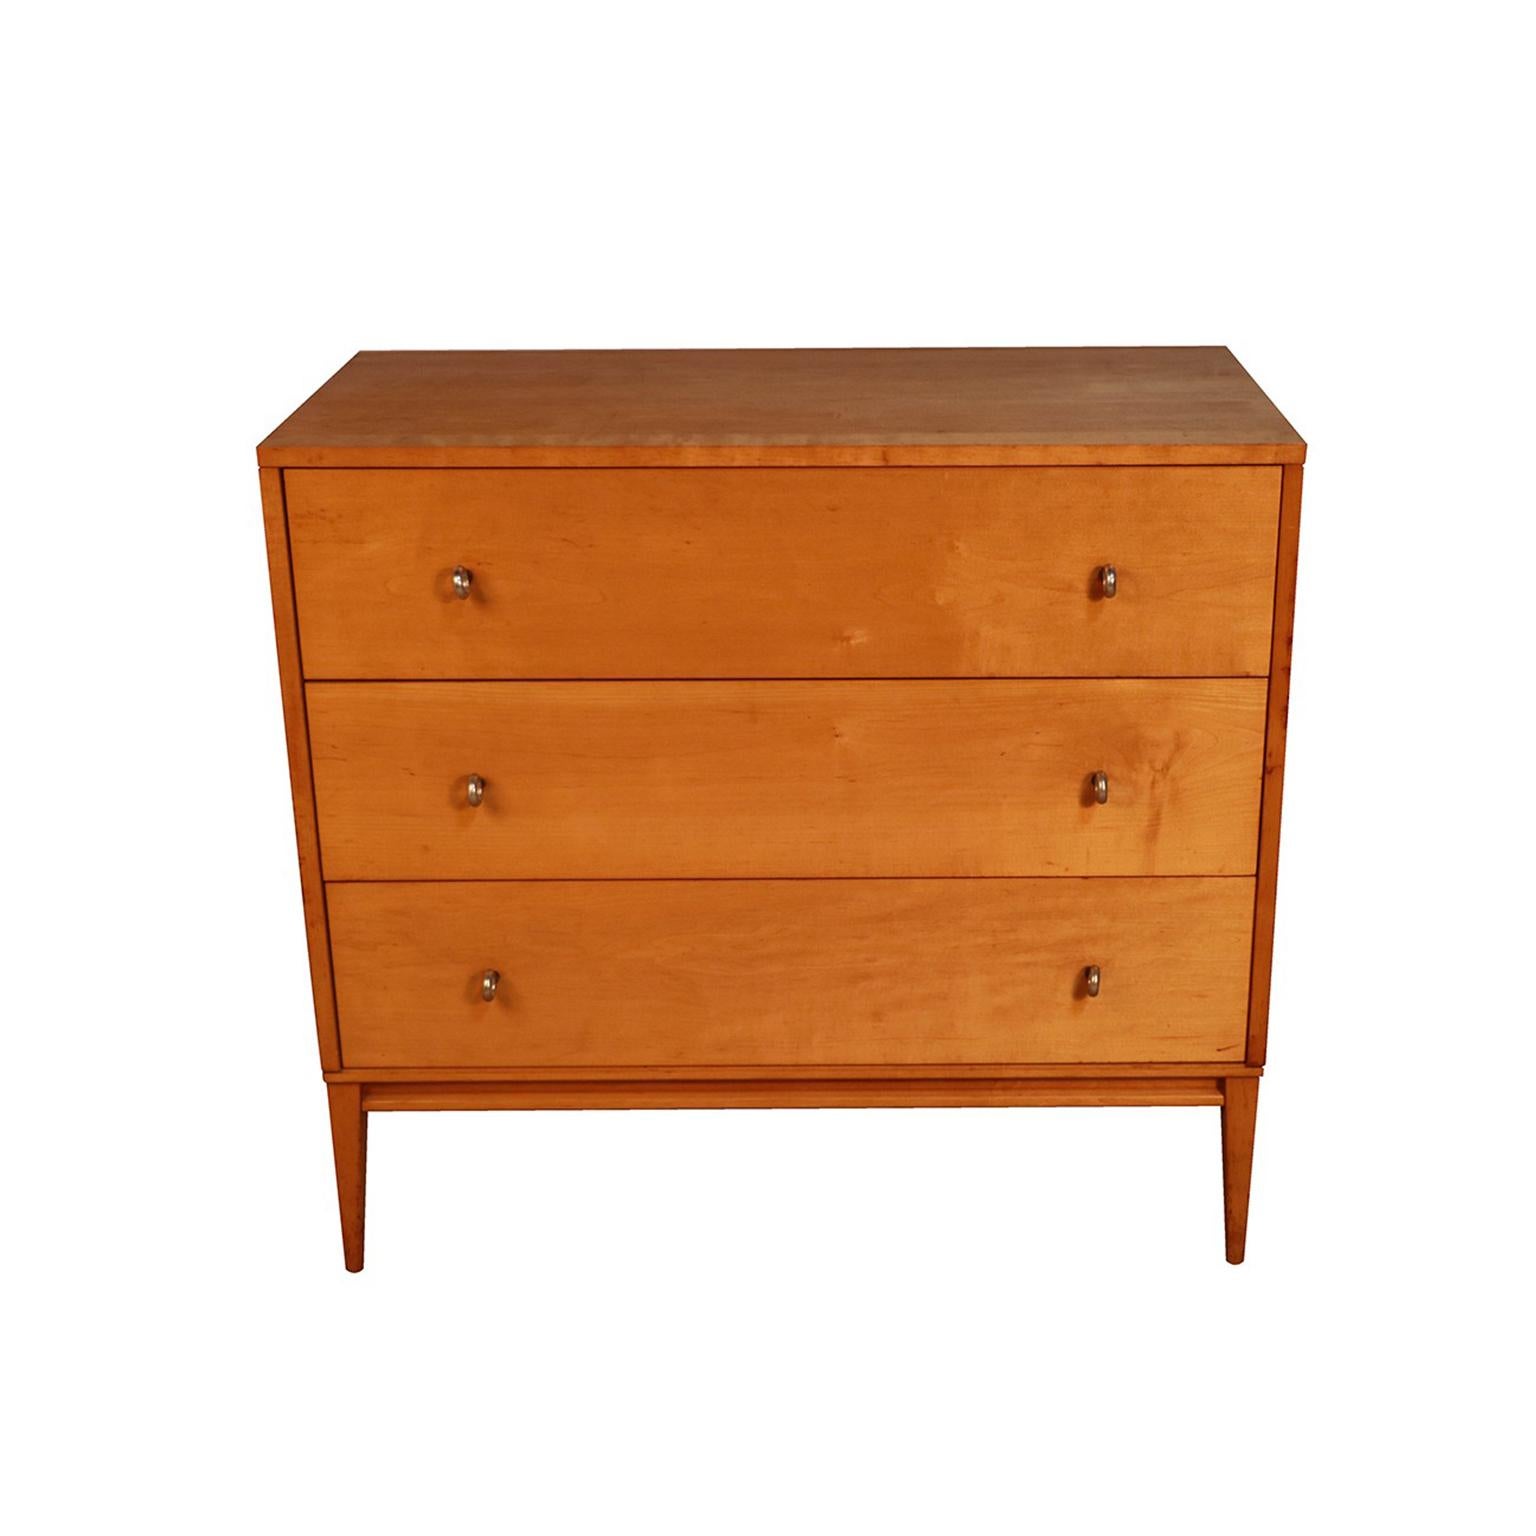 Handsome, Classic Mid-Century Modern three drawer dresser, chest by Paul McCobb for his Pre-Planner Group Winchendon modern line made by Winchendon Furniture in the 1950s. Features three spacious, deep drawers, with original signature aluminum ring